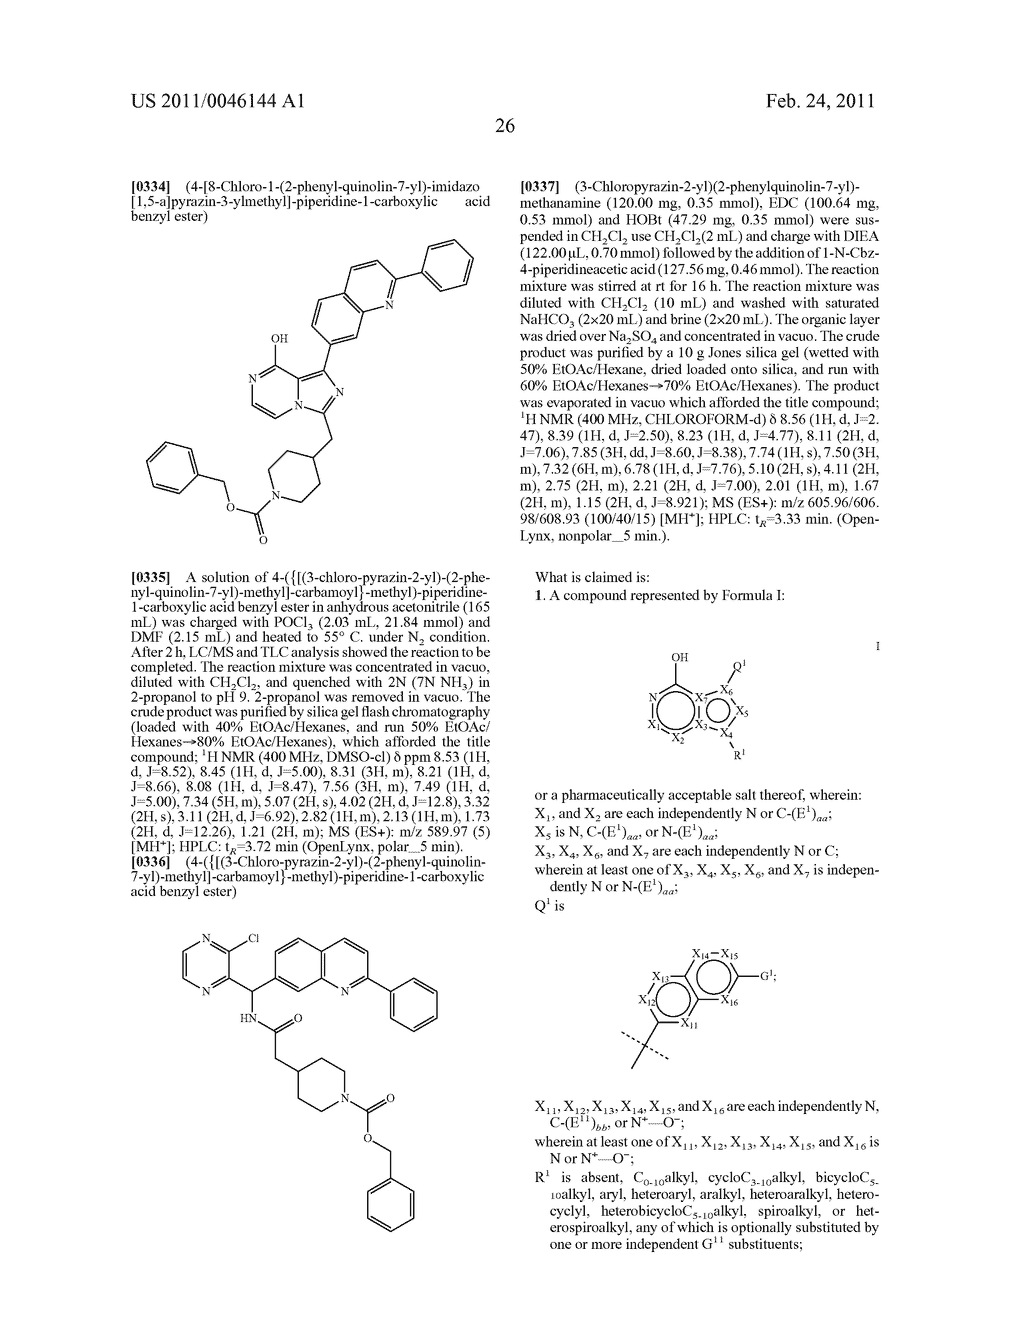 IMIDAZOPYRAZINOL DERIVATIVES FOR THE TREATMENT OF CANCERS - diagram, schematic, and image 27